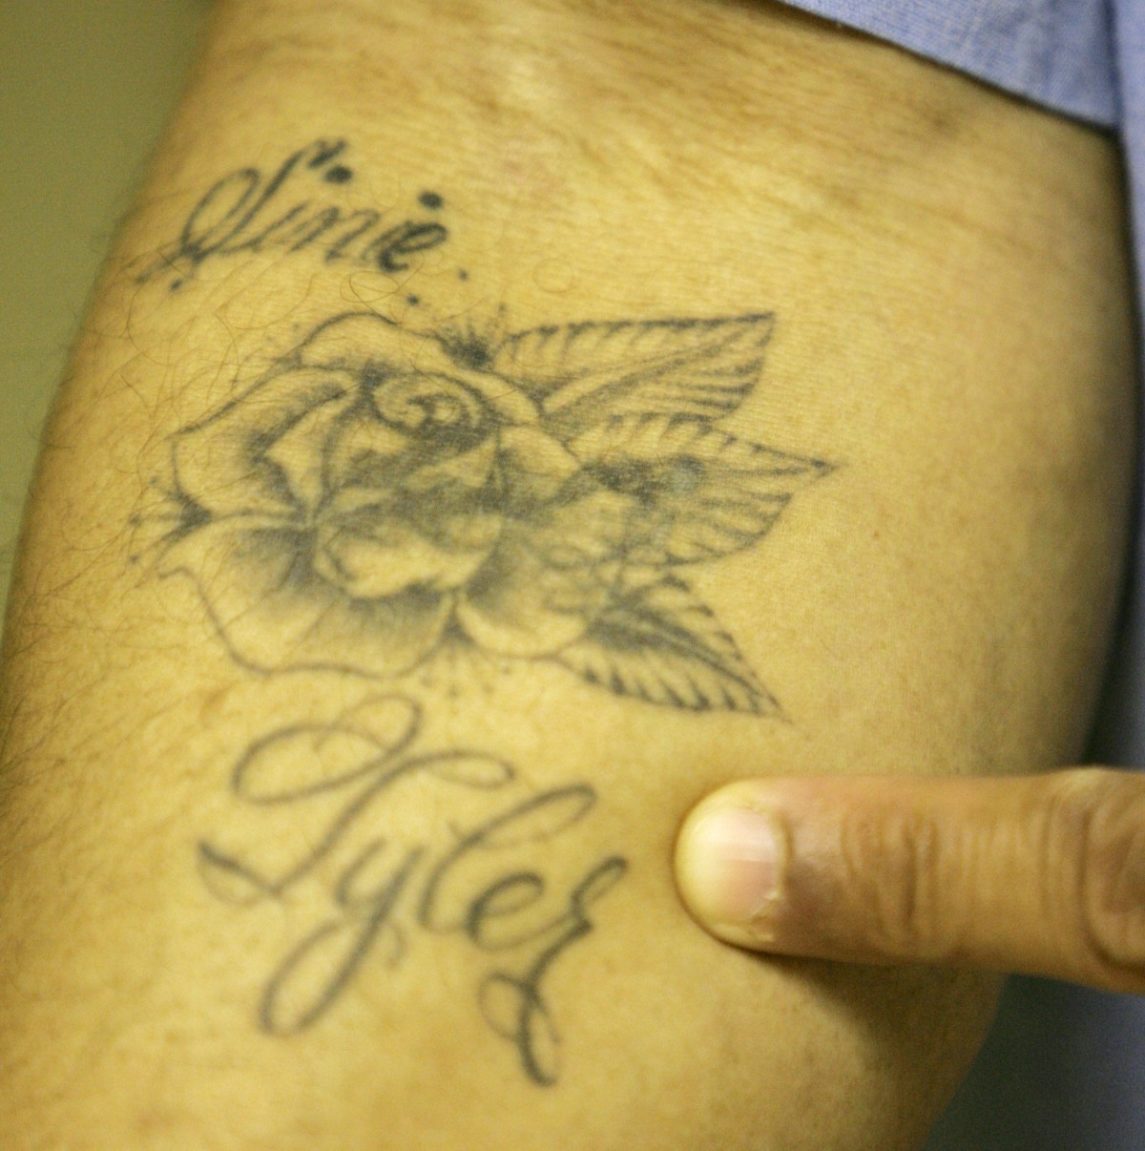 Are Needle Exchange Programs The Answer To The Contribution Of Prison Tattoos To Hepatitis?